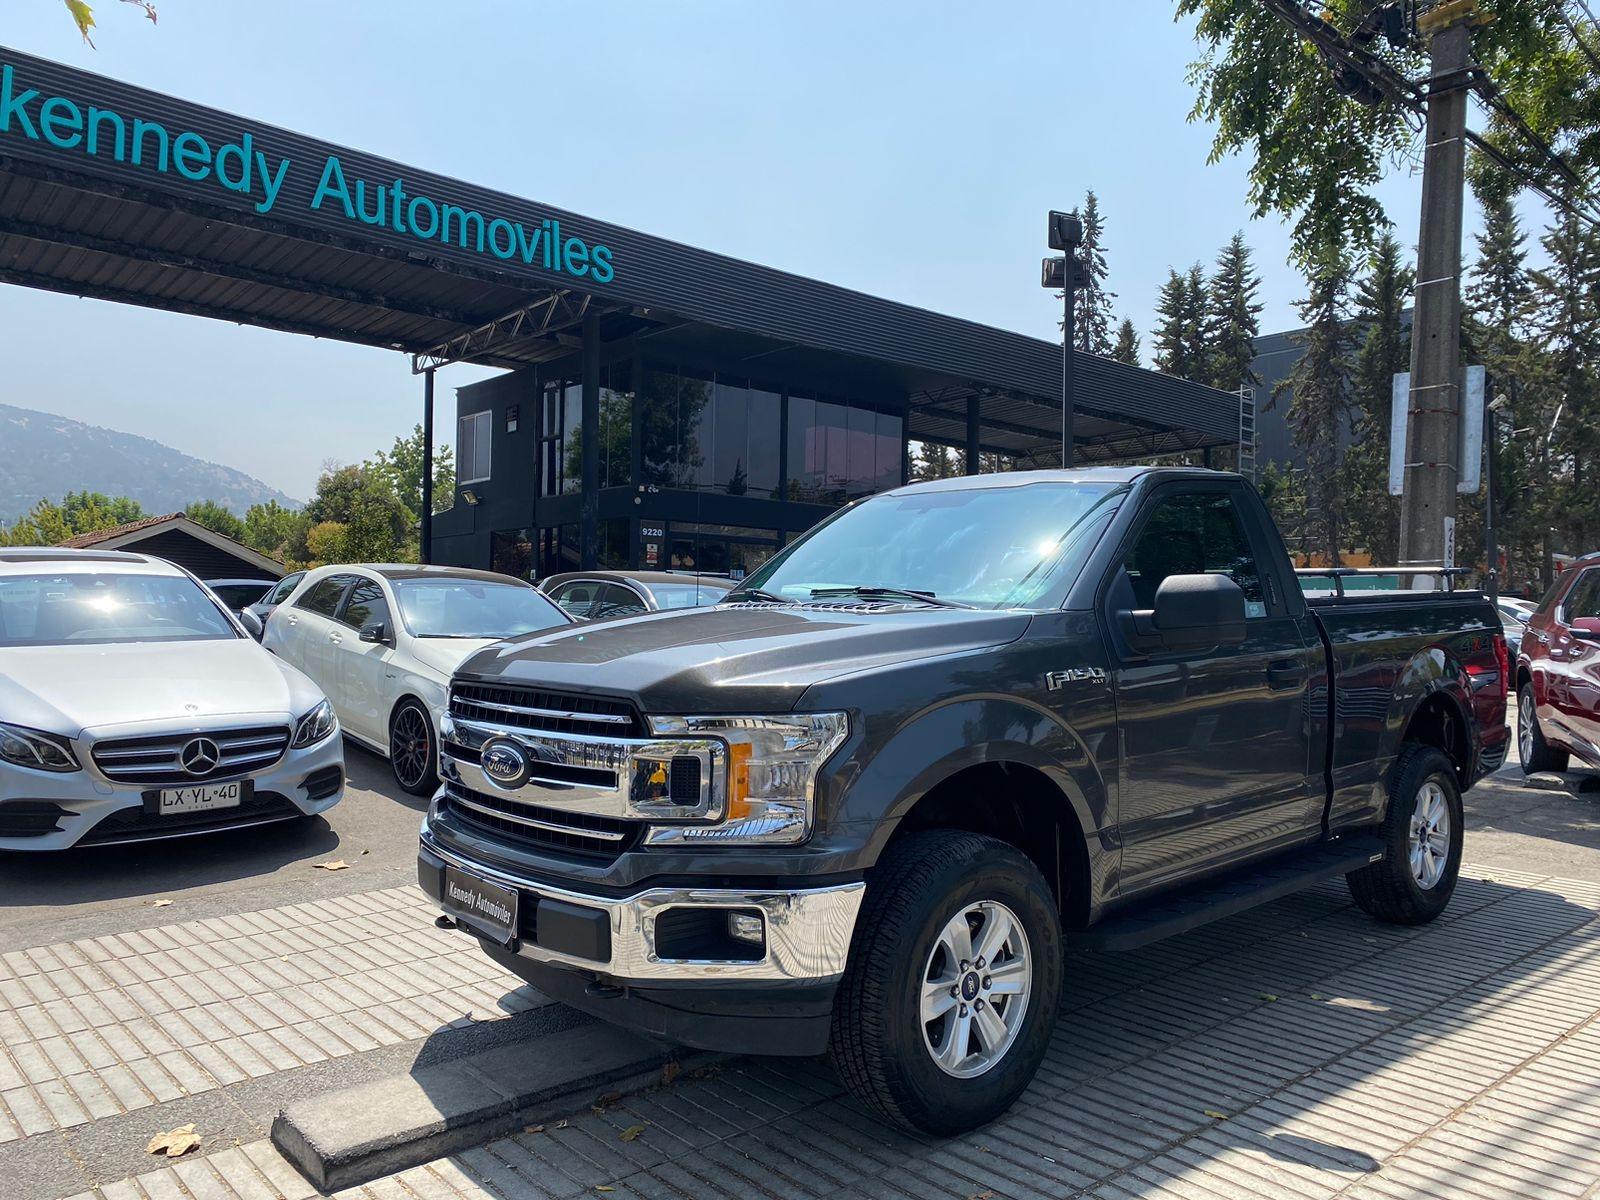 FORD F-150 3.3 Regular Cab XLT 4WD 2019 Impecable - KENNEDY AUTOMOVILES